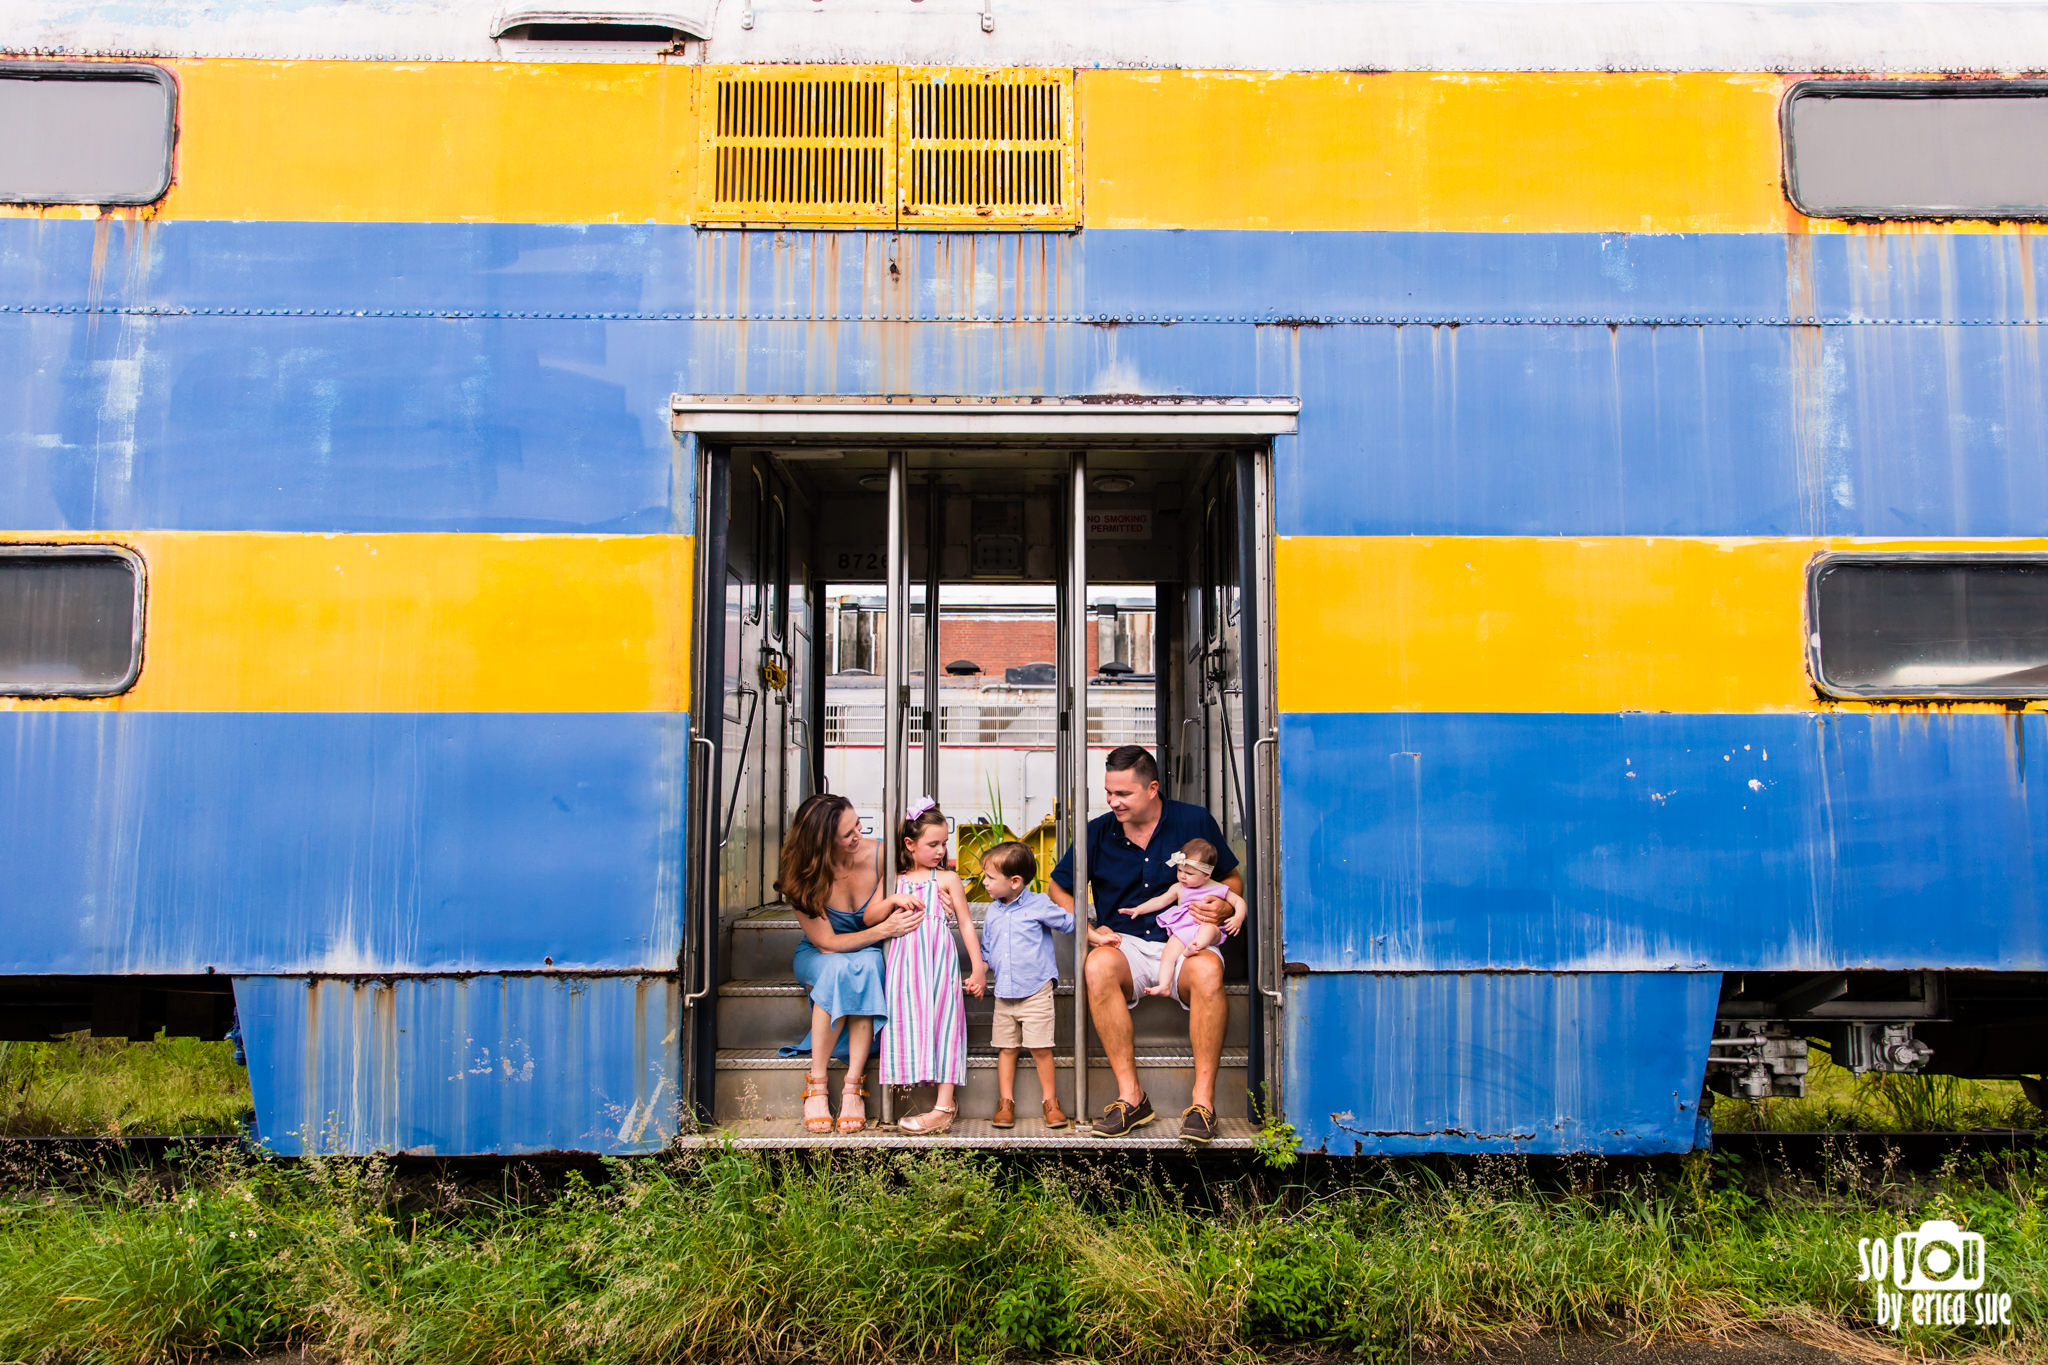 so-you-by-erica-sue-gold-coast-railroad-museum-miami-family-photo-shoot-session-7376.JPG